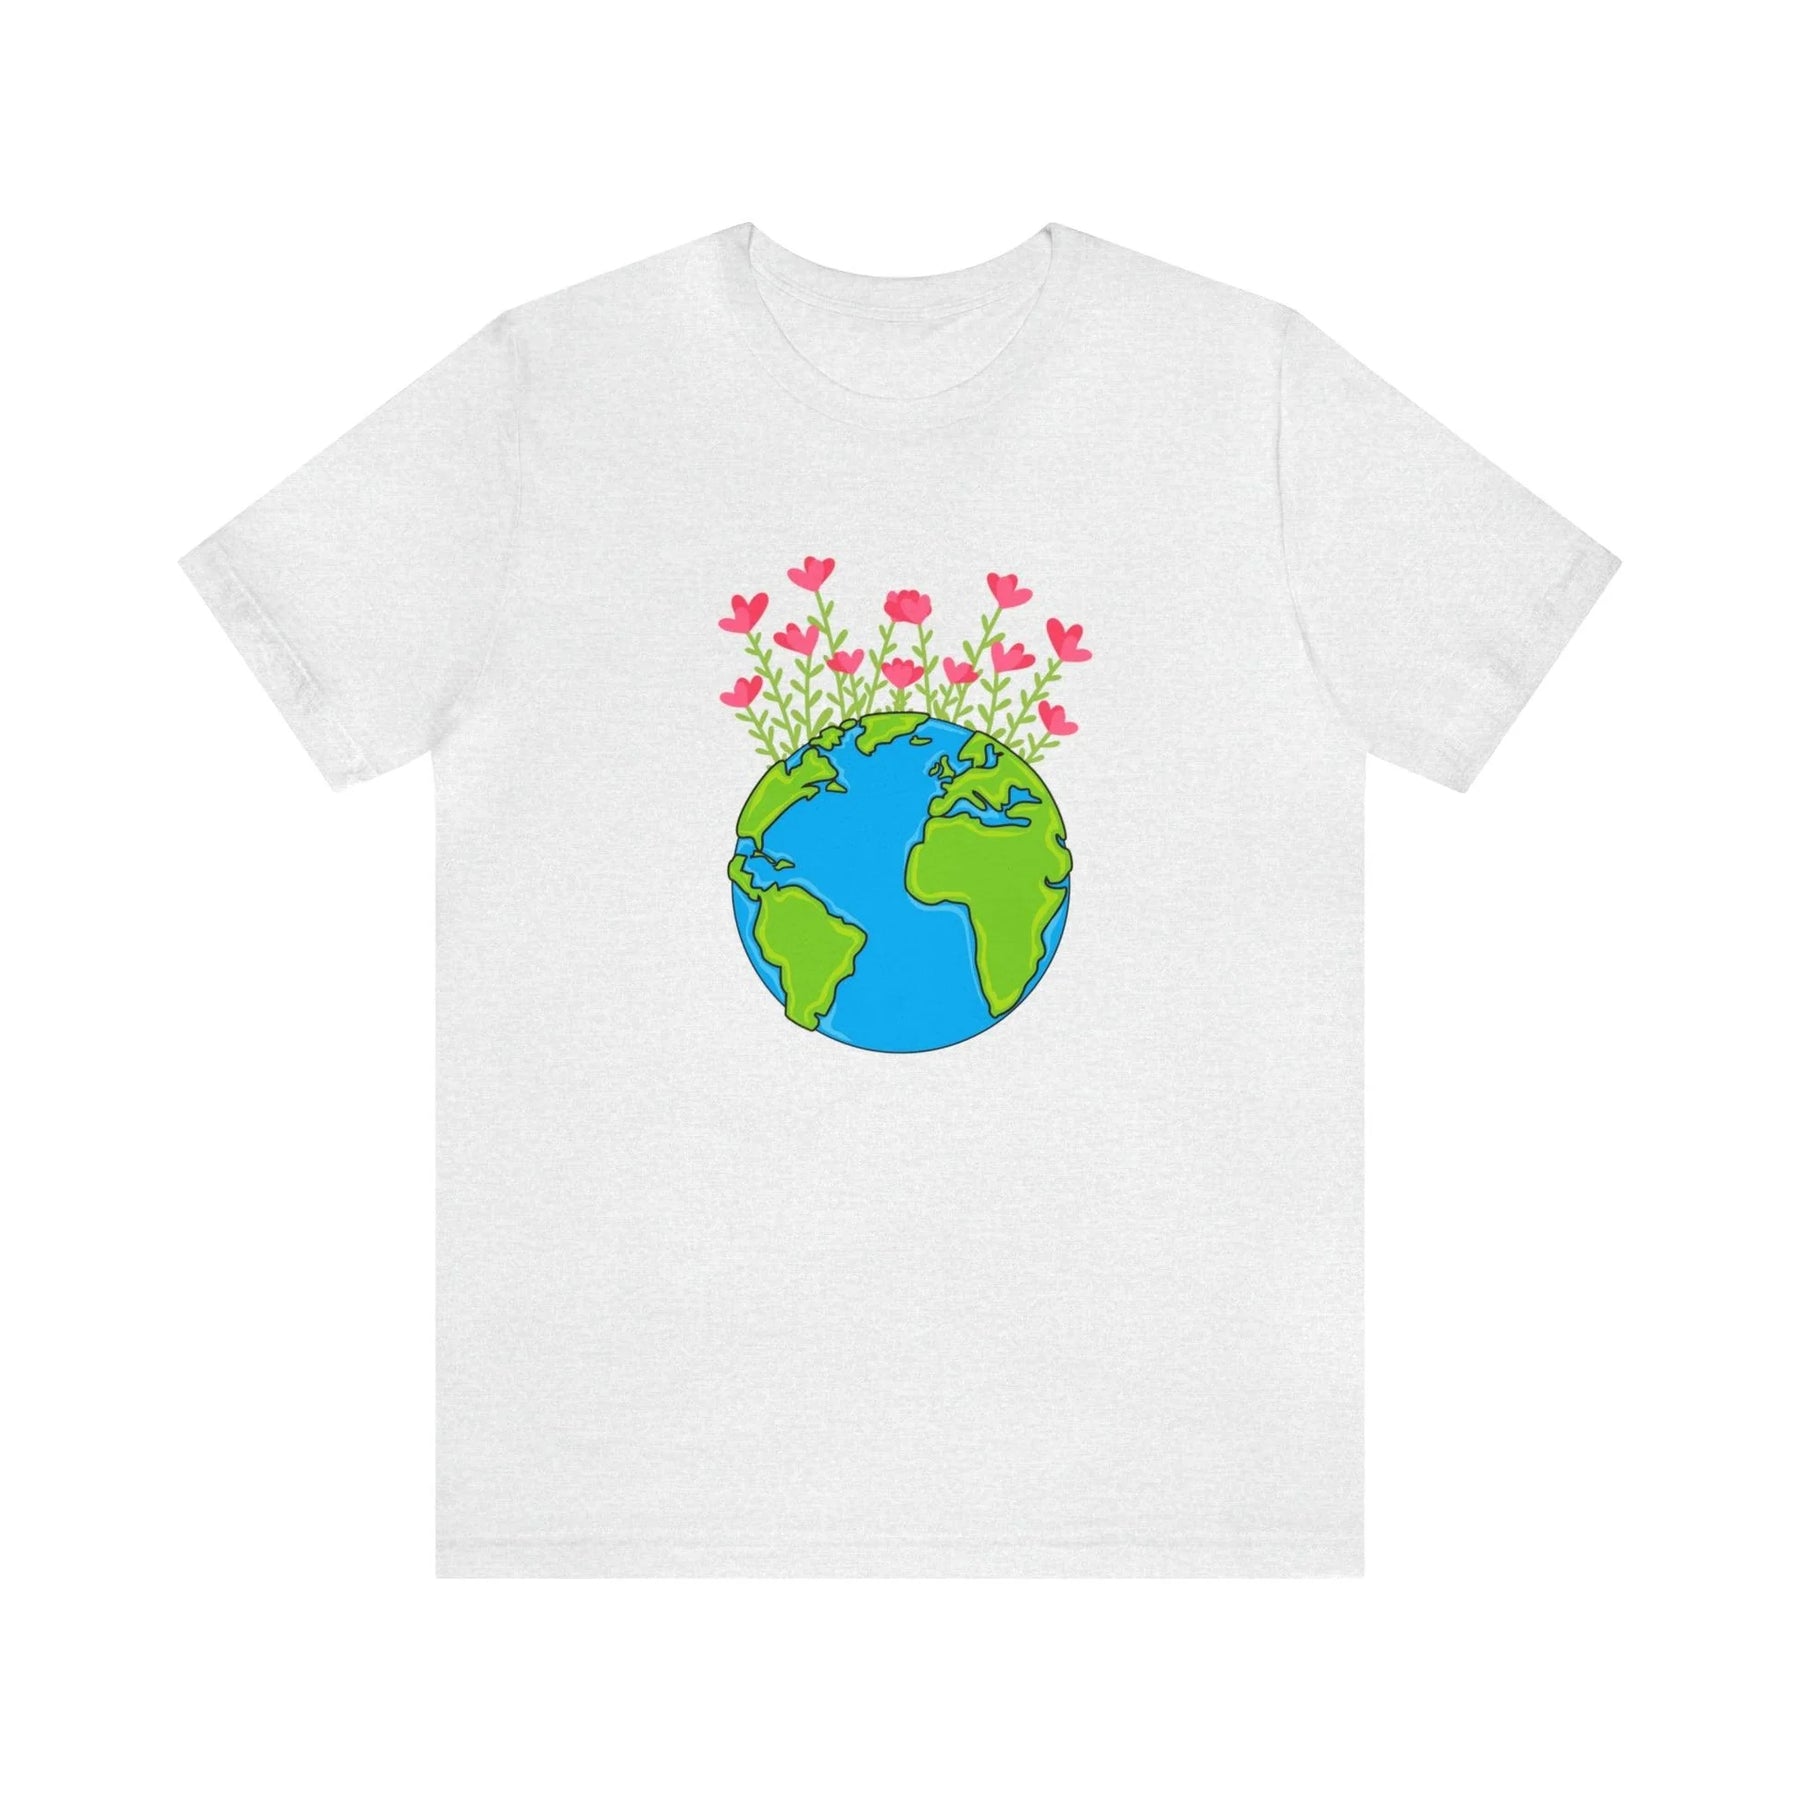 Our Earth Shirt